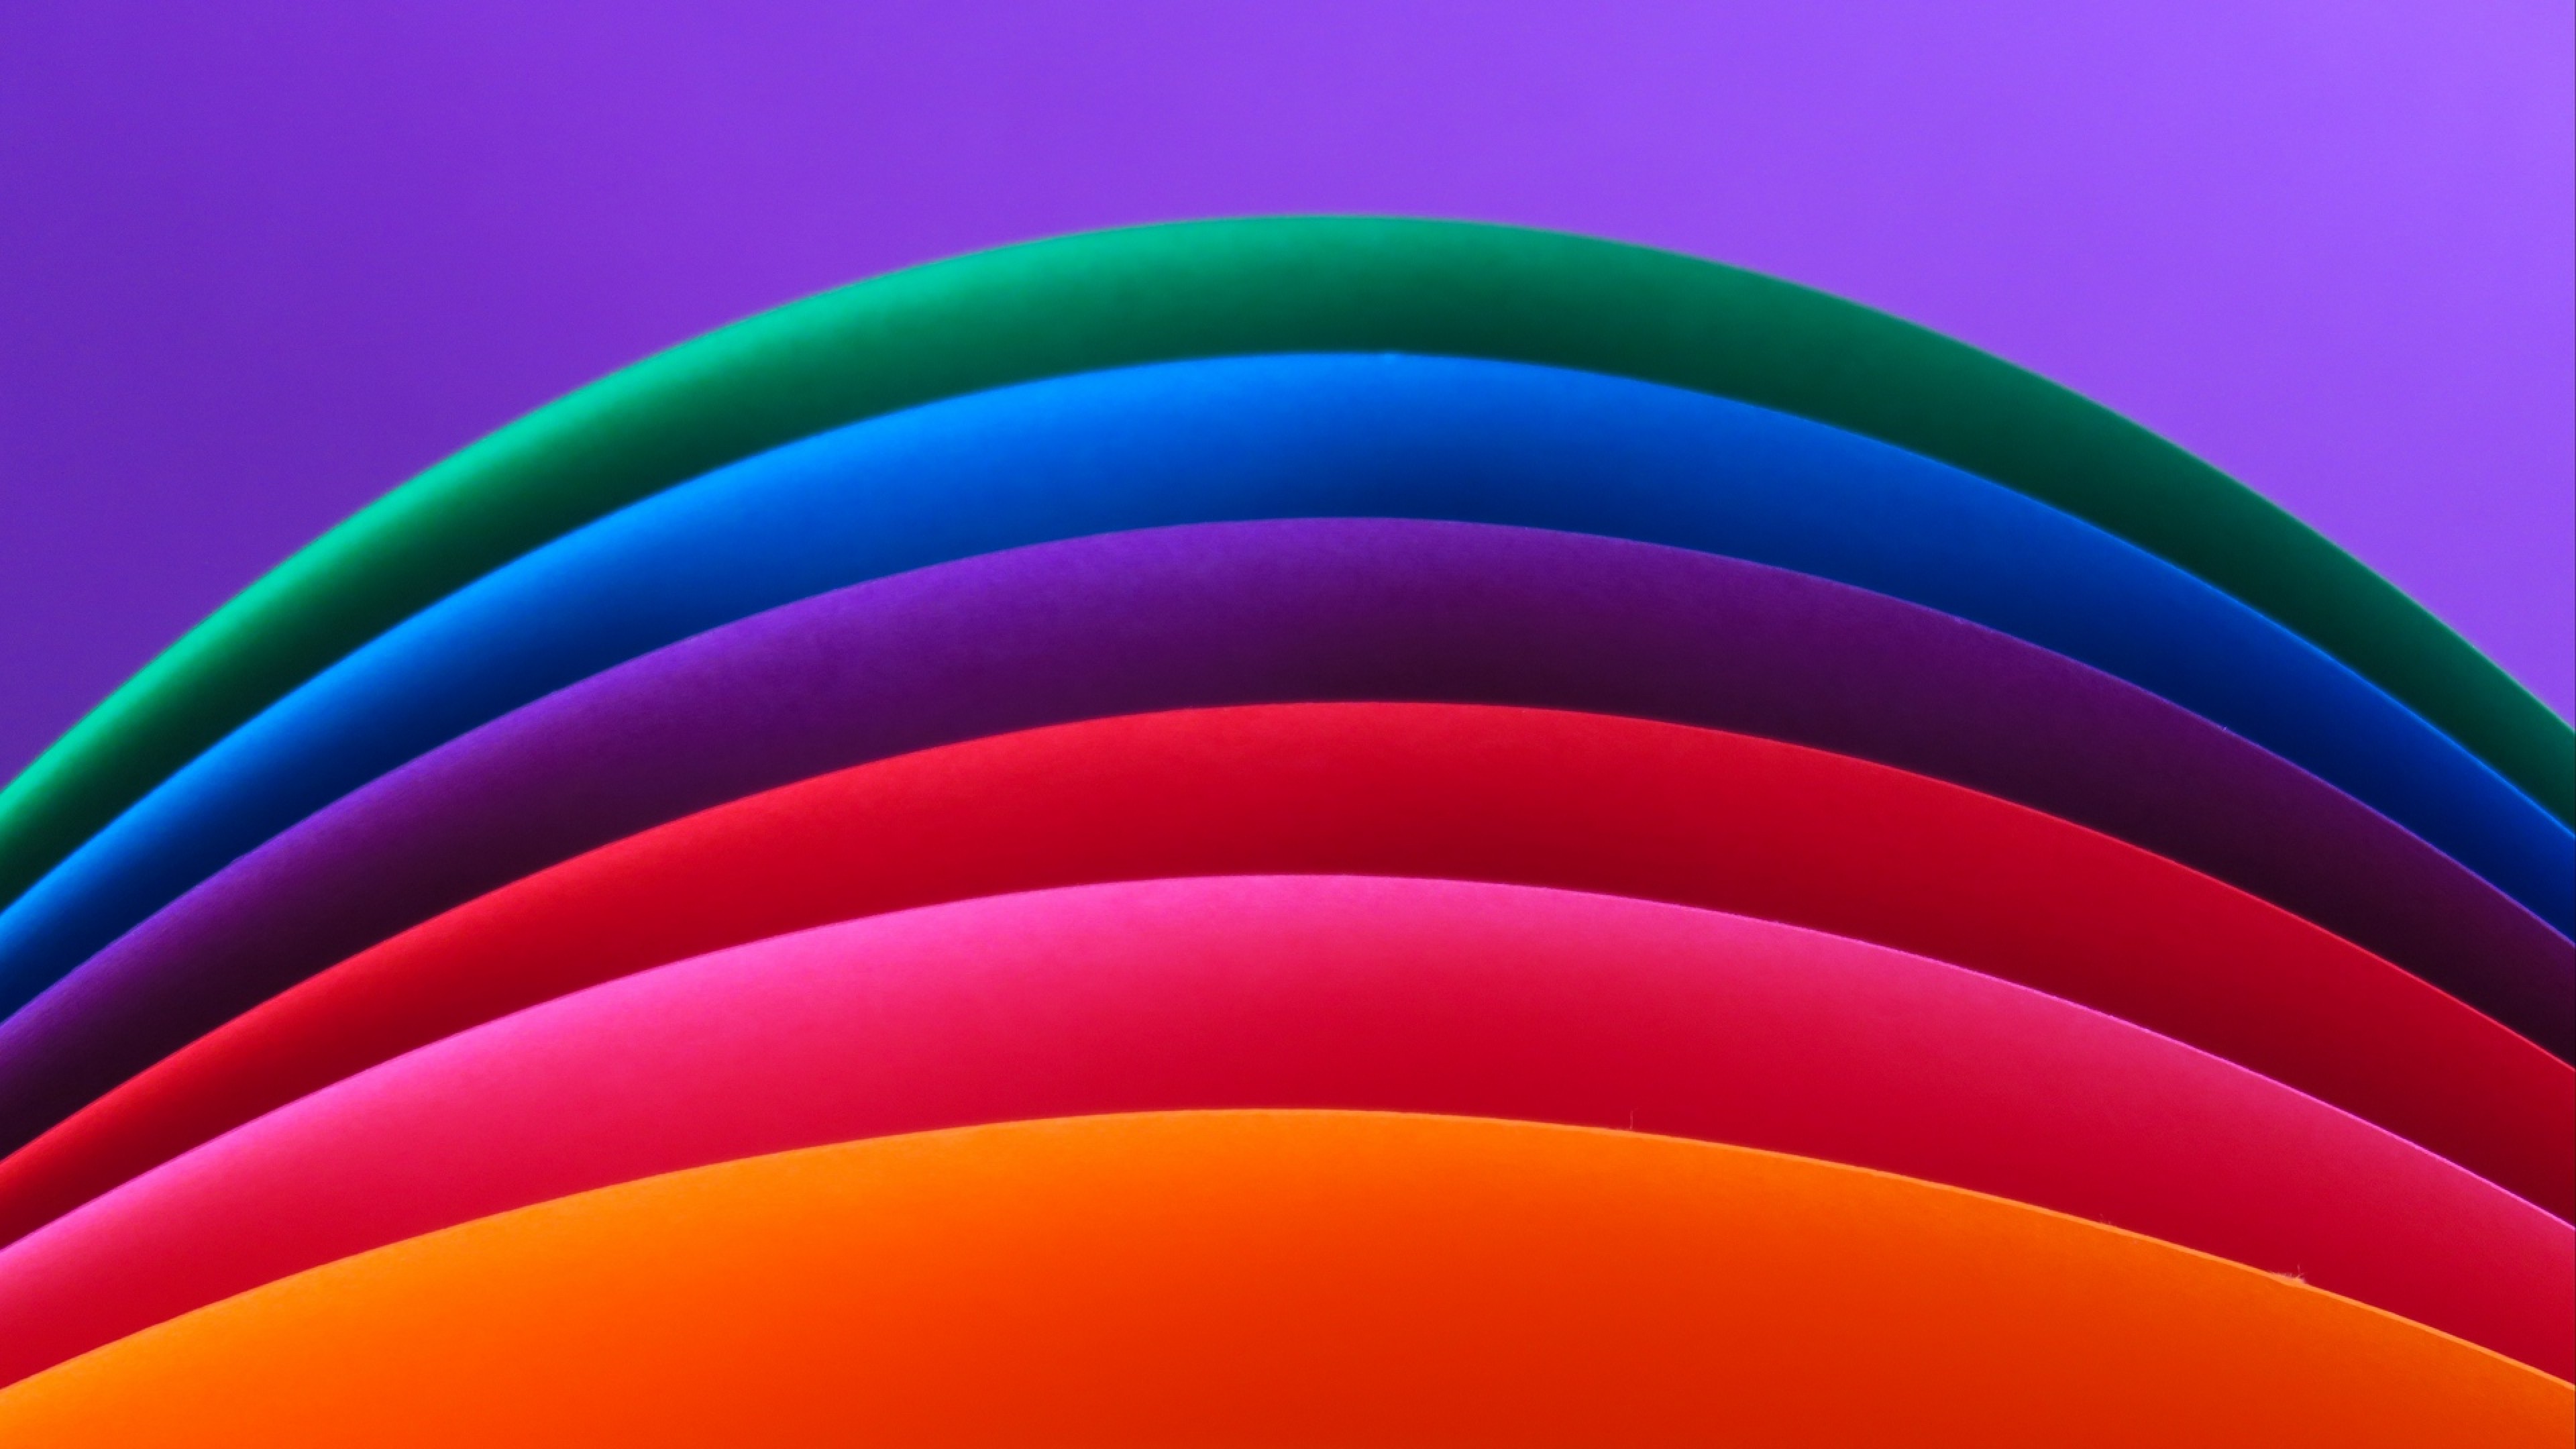 Multicolored curved lines HD Wallpaper 4K Ultra HD